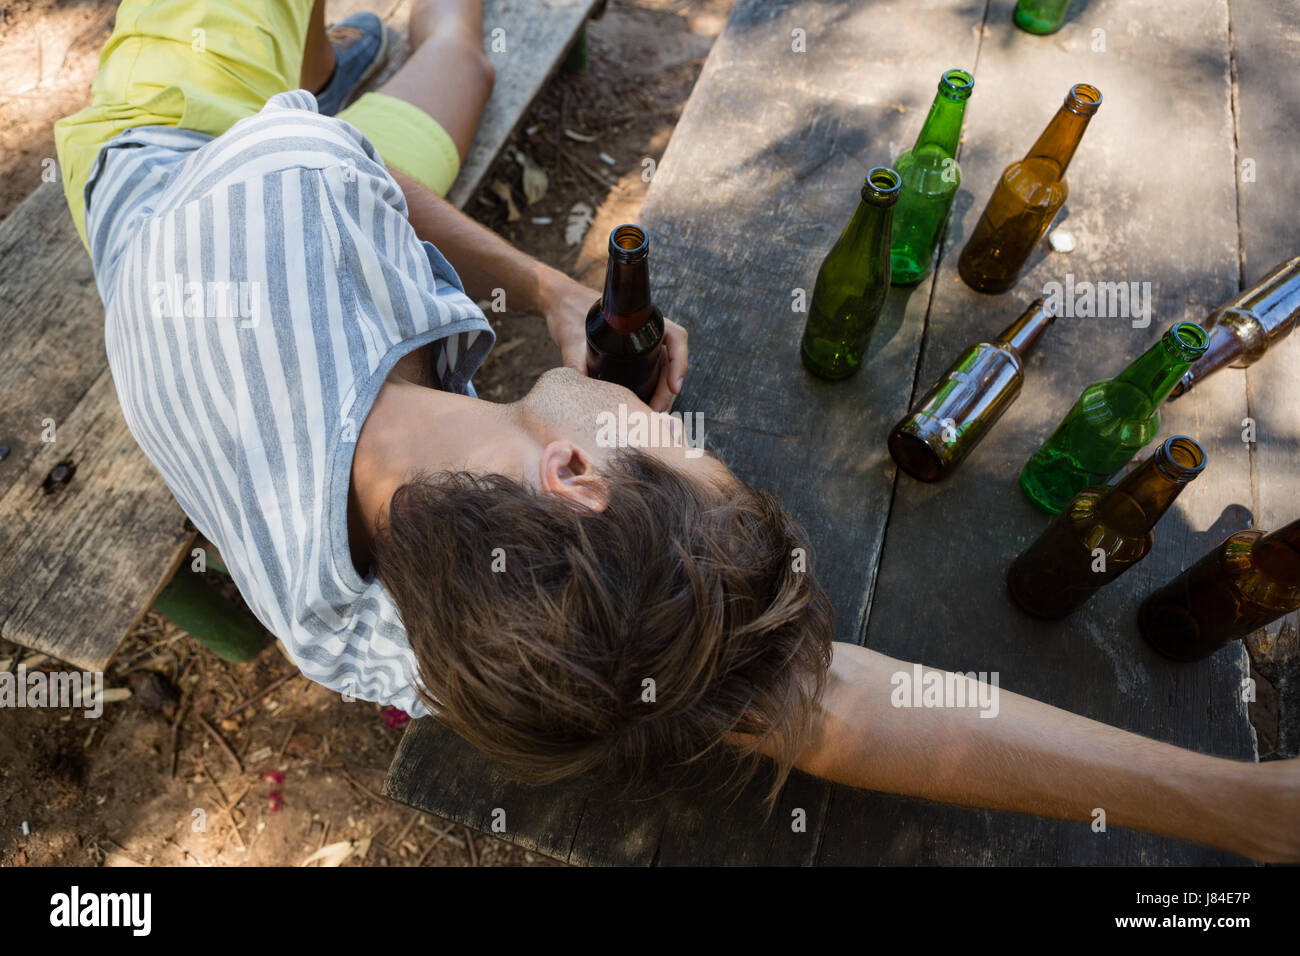 unconscious-drunk-man-lying-on-a-bench-in-the-park-J84E7P.jpg